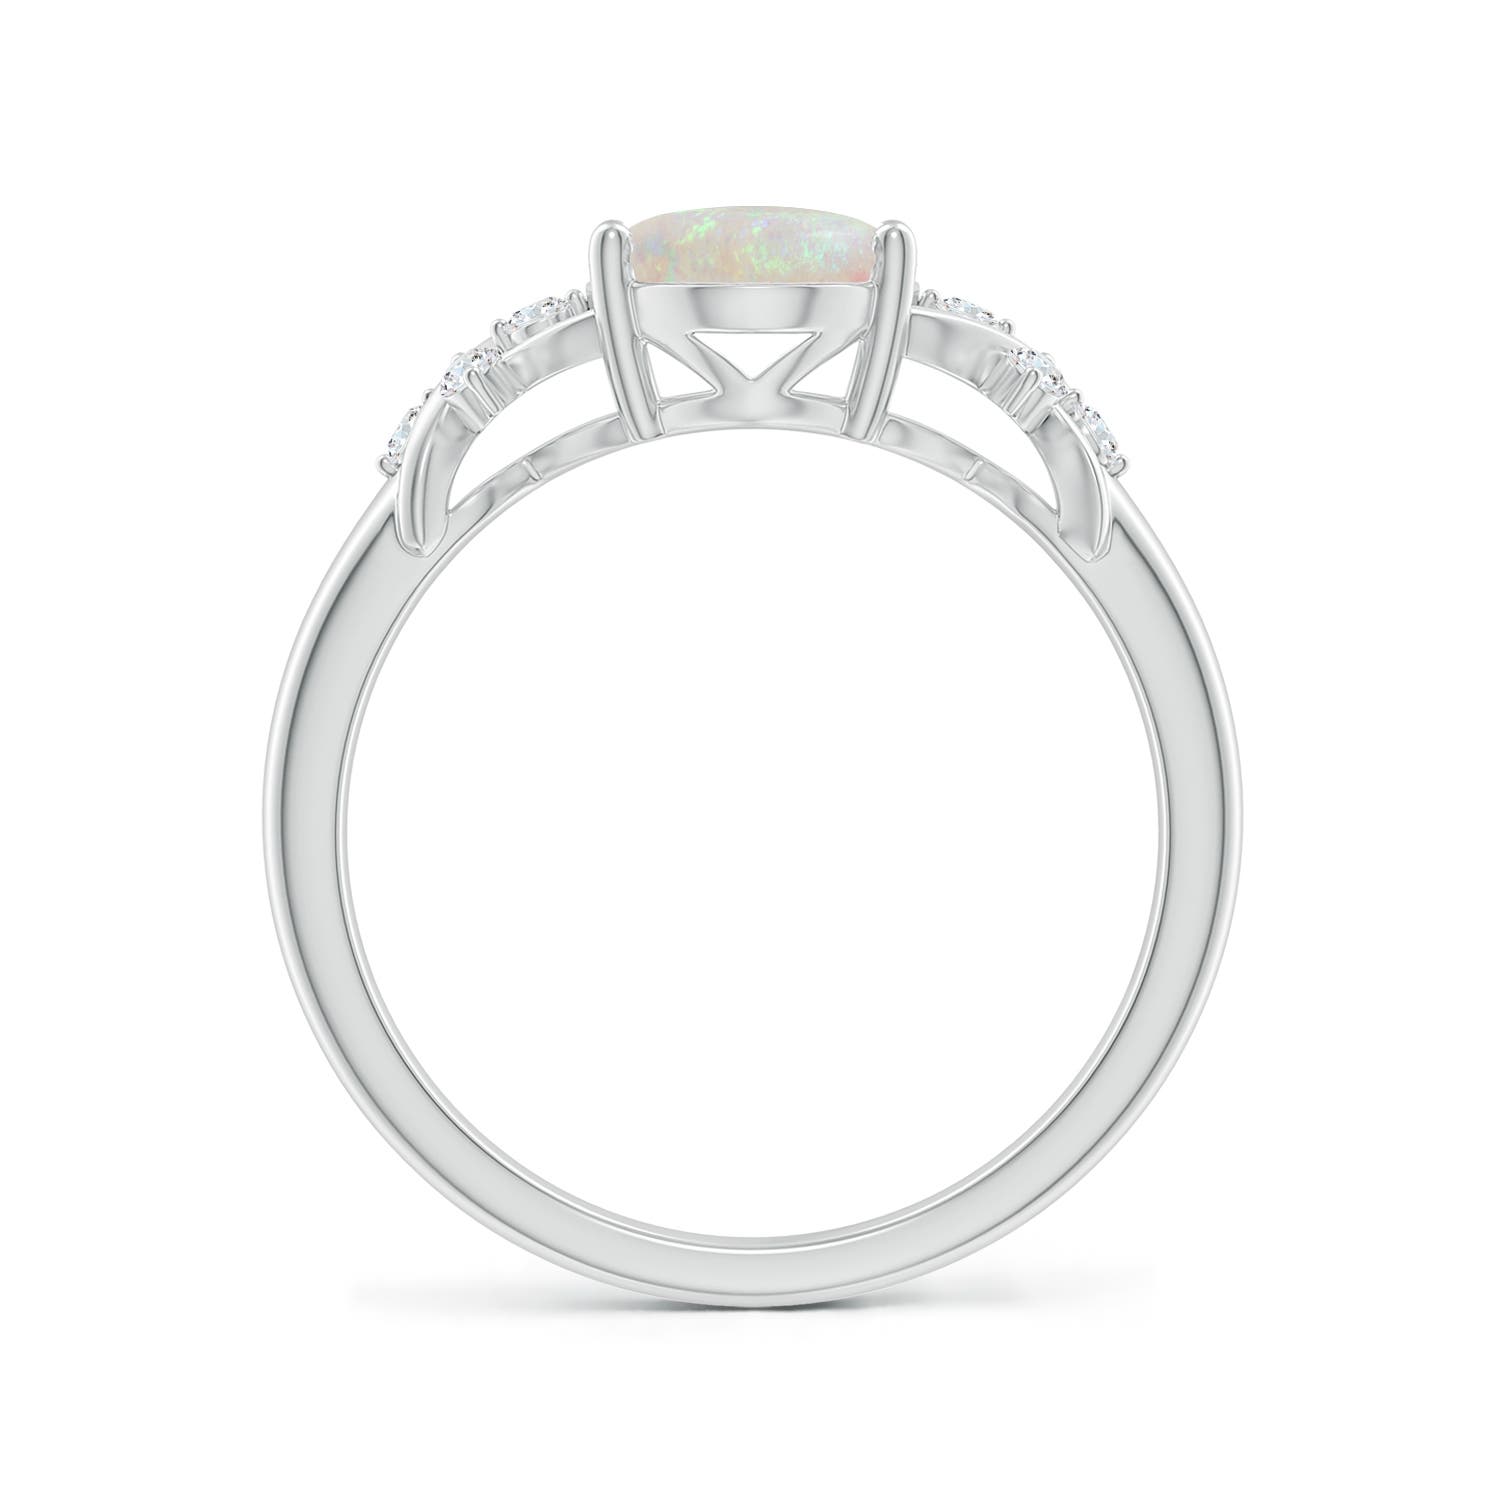 AA - Opal / 1.21 CT / 14 KT White Gold